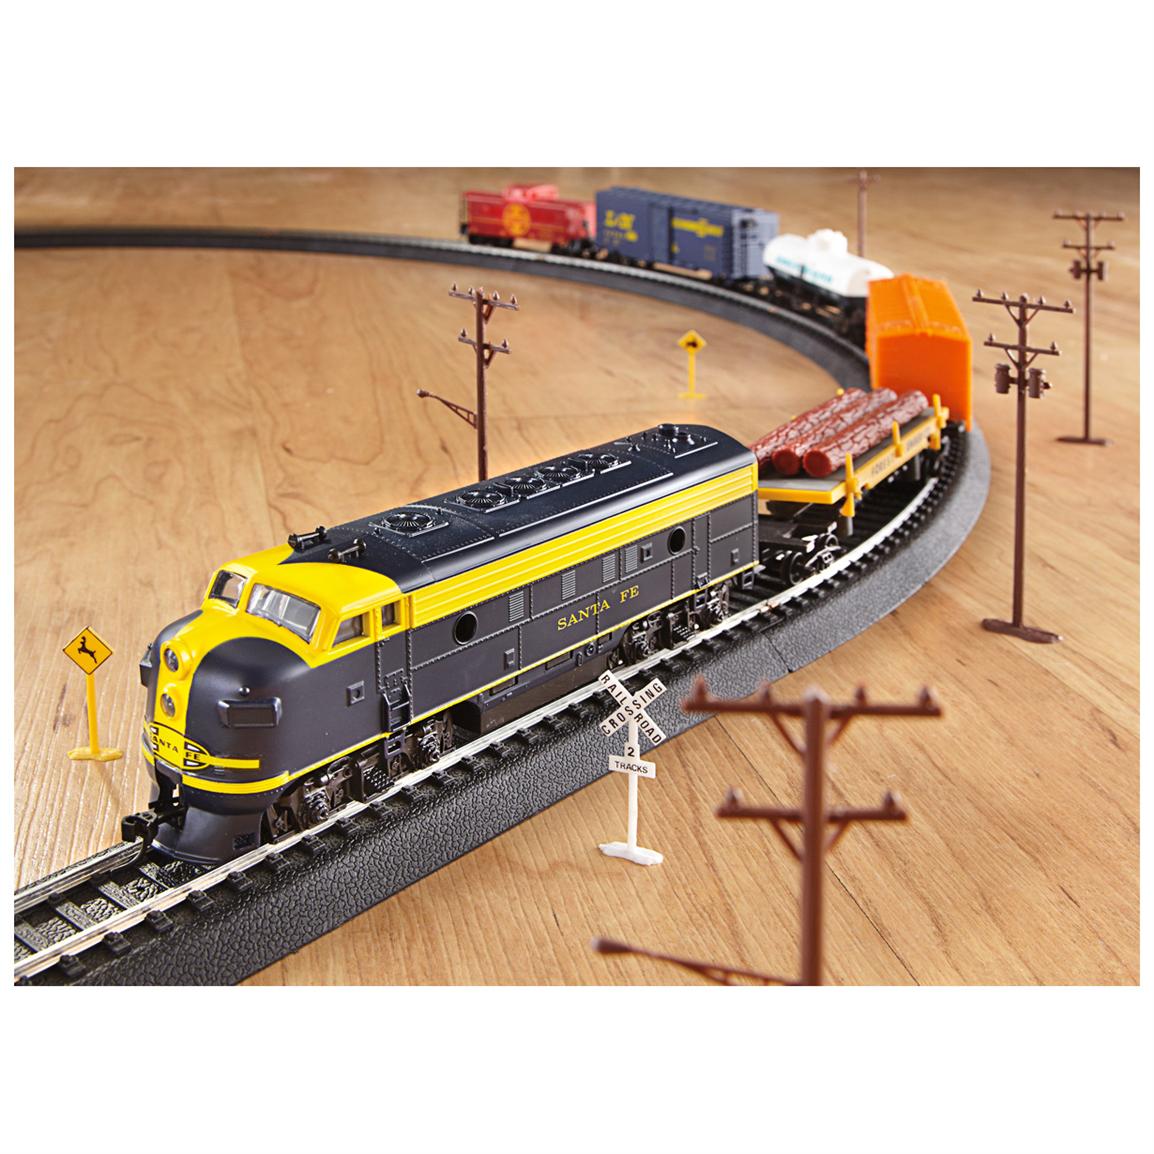 Over 150-Pc. Rolling Rails Electric Train Set - 575971, Toys